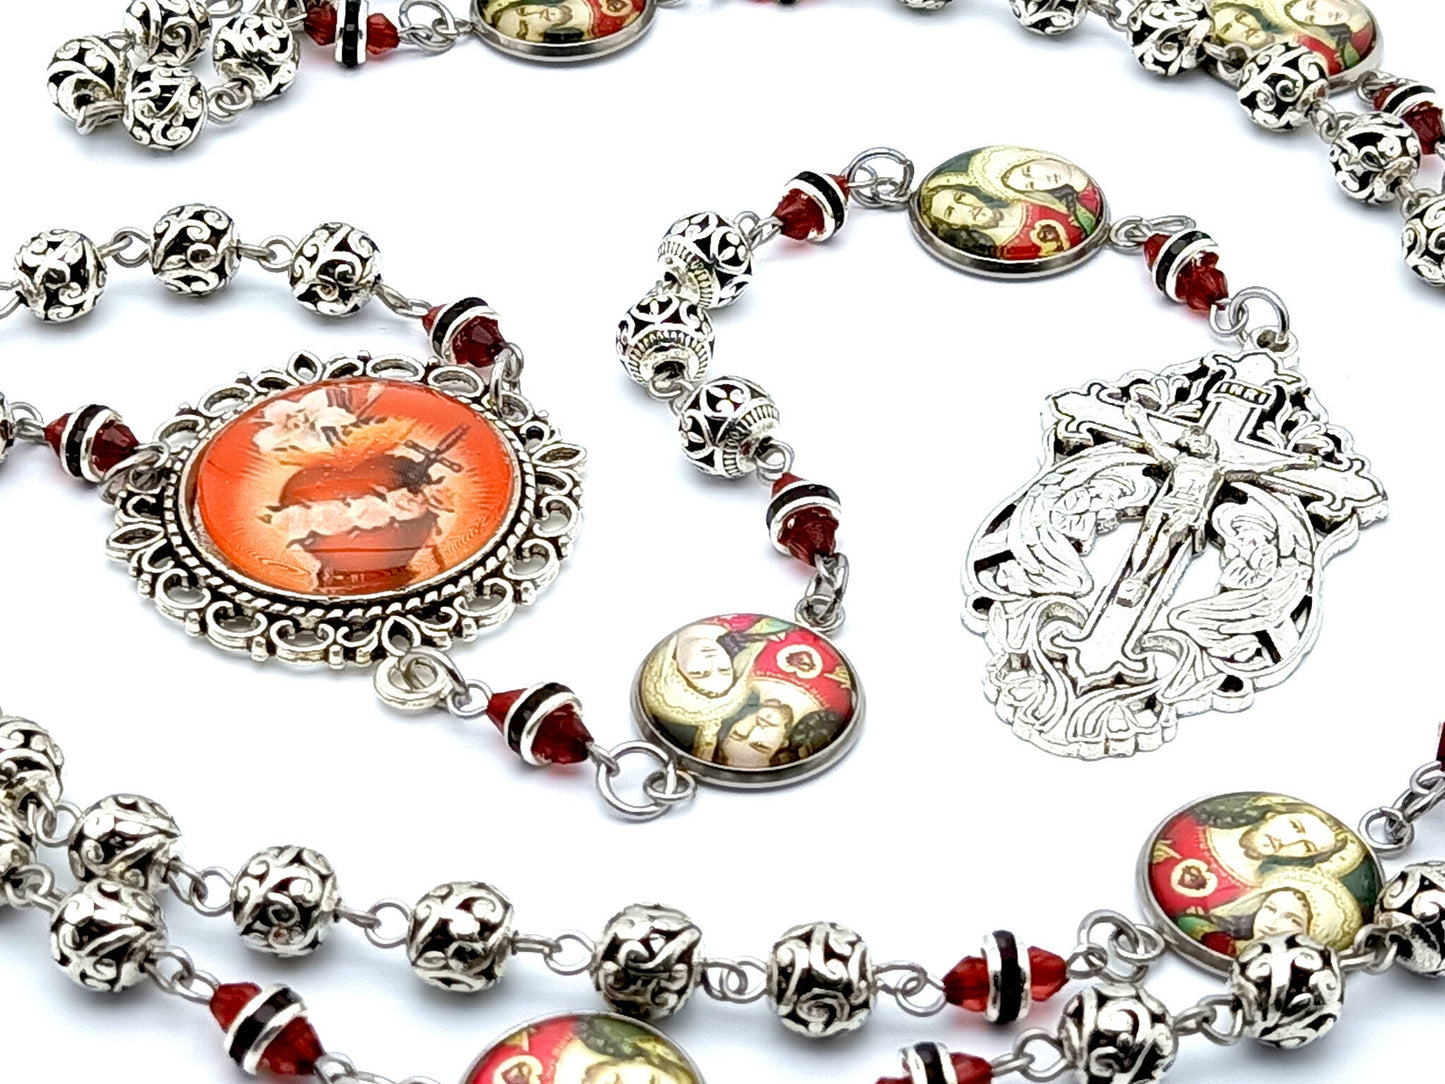 Two Hearts of Jesus and Mary unique rosary beads with Tibetan silver beads, Holy Angels crucifix and picture linking medal beads.